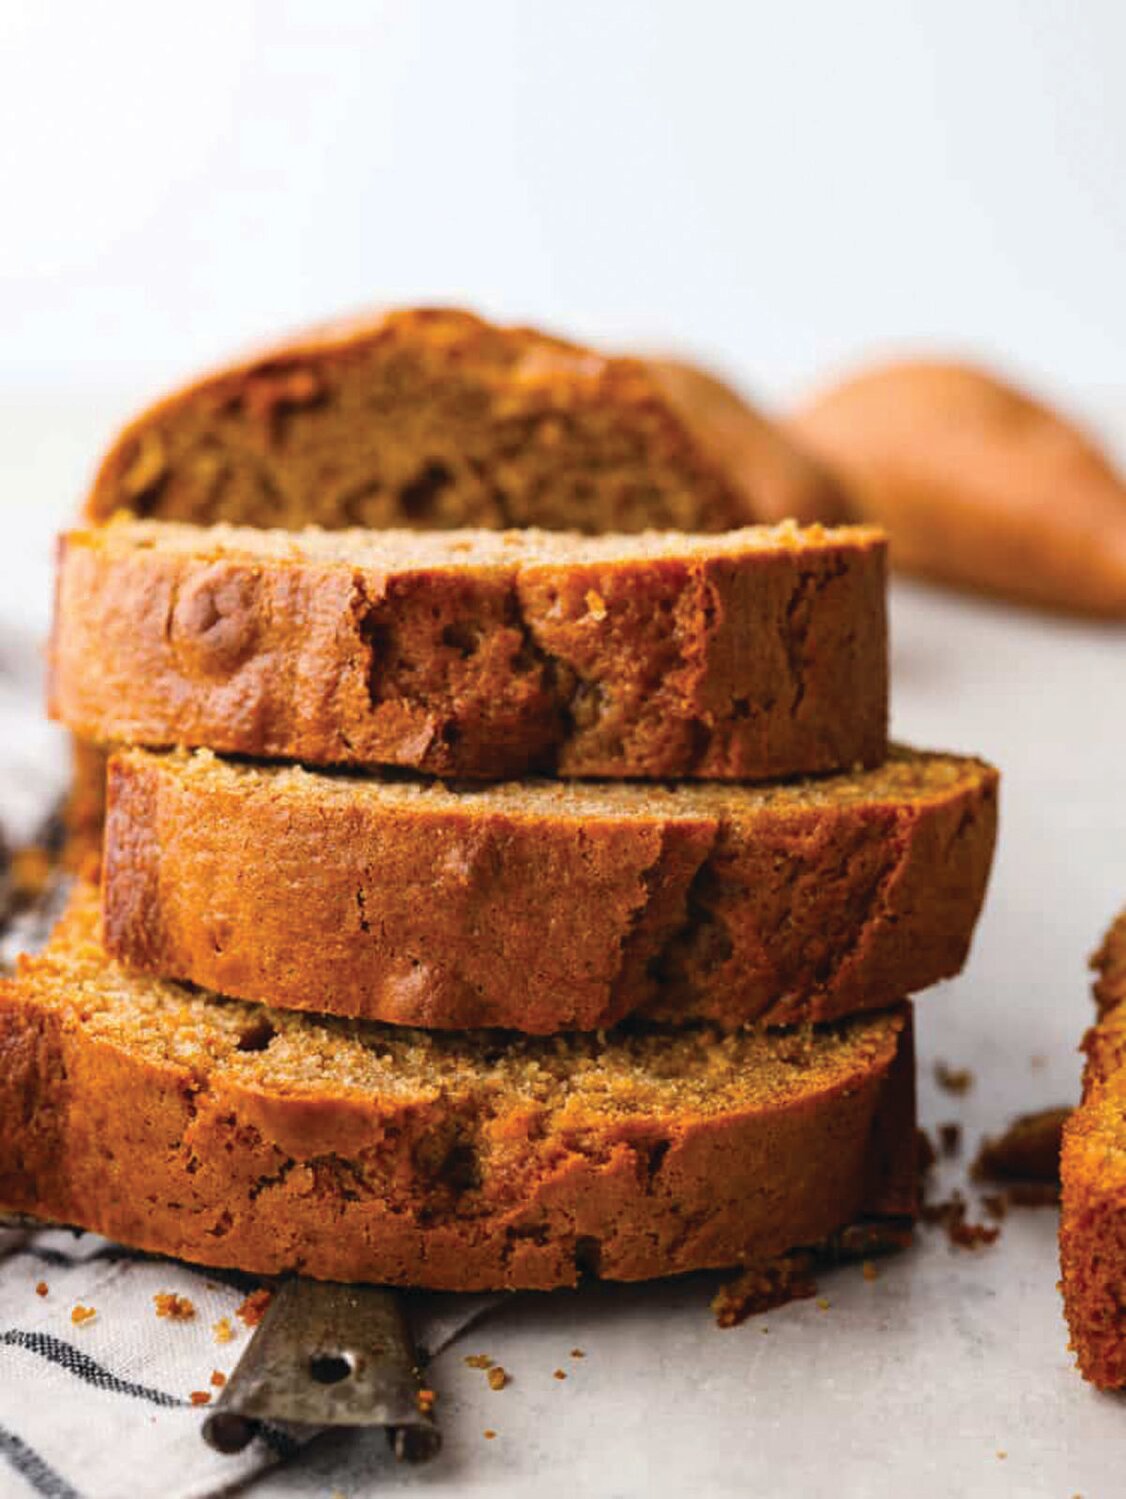 Fall is a great time to enjoy nutrient-rich sweet potatoes. You don’t have to save them for Thanksgiving; this sweet potato bread is good year-round.